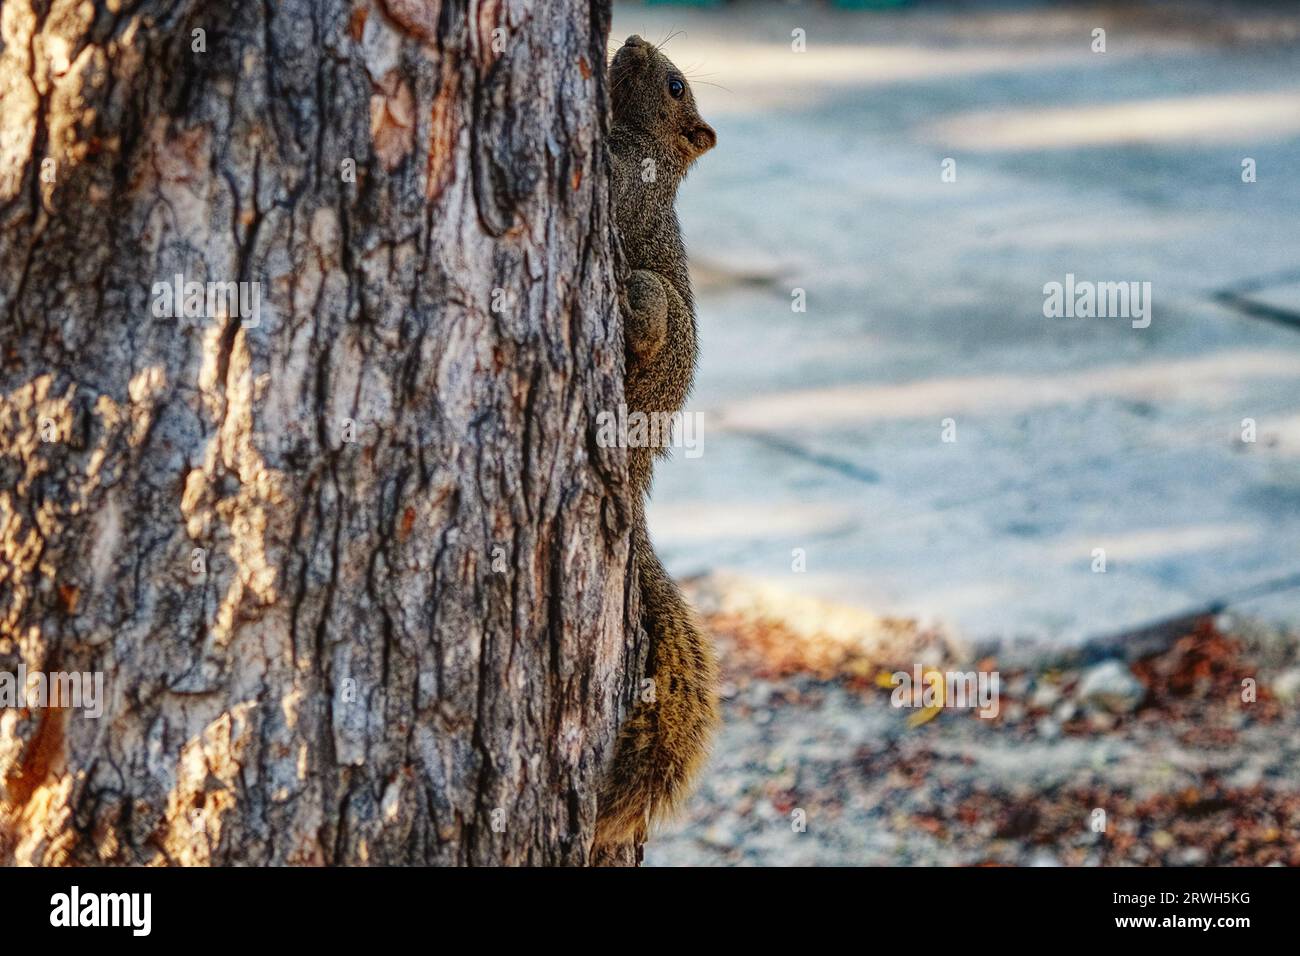 A brown squirrel with a bushy tail is climbing up a rough-textured tree trunk in a park. Squirrel on a tree close-up. Stock Photo